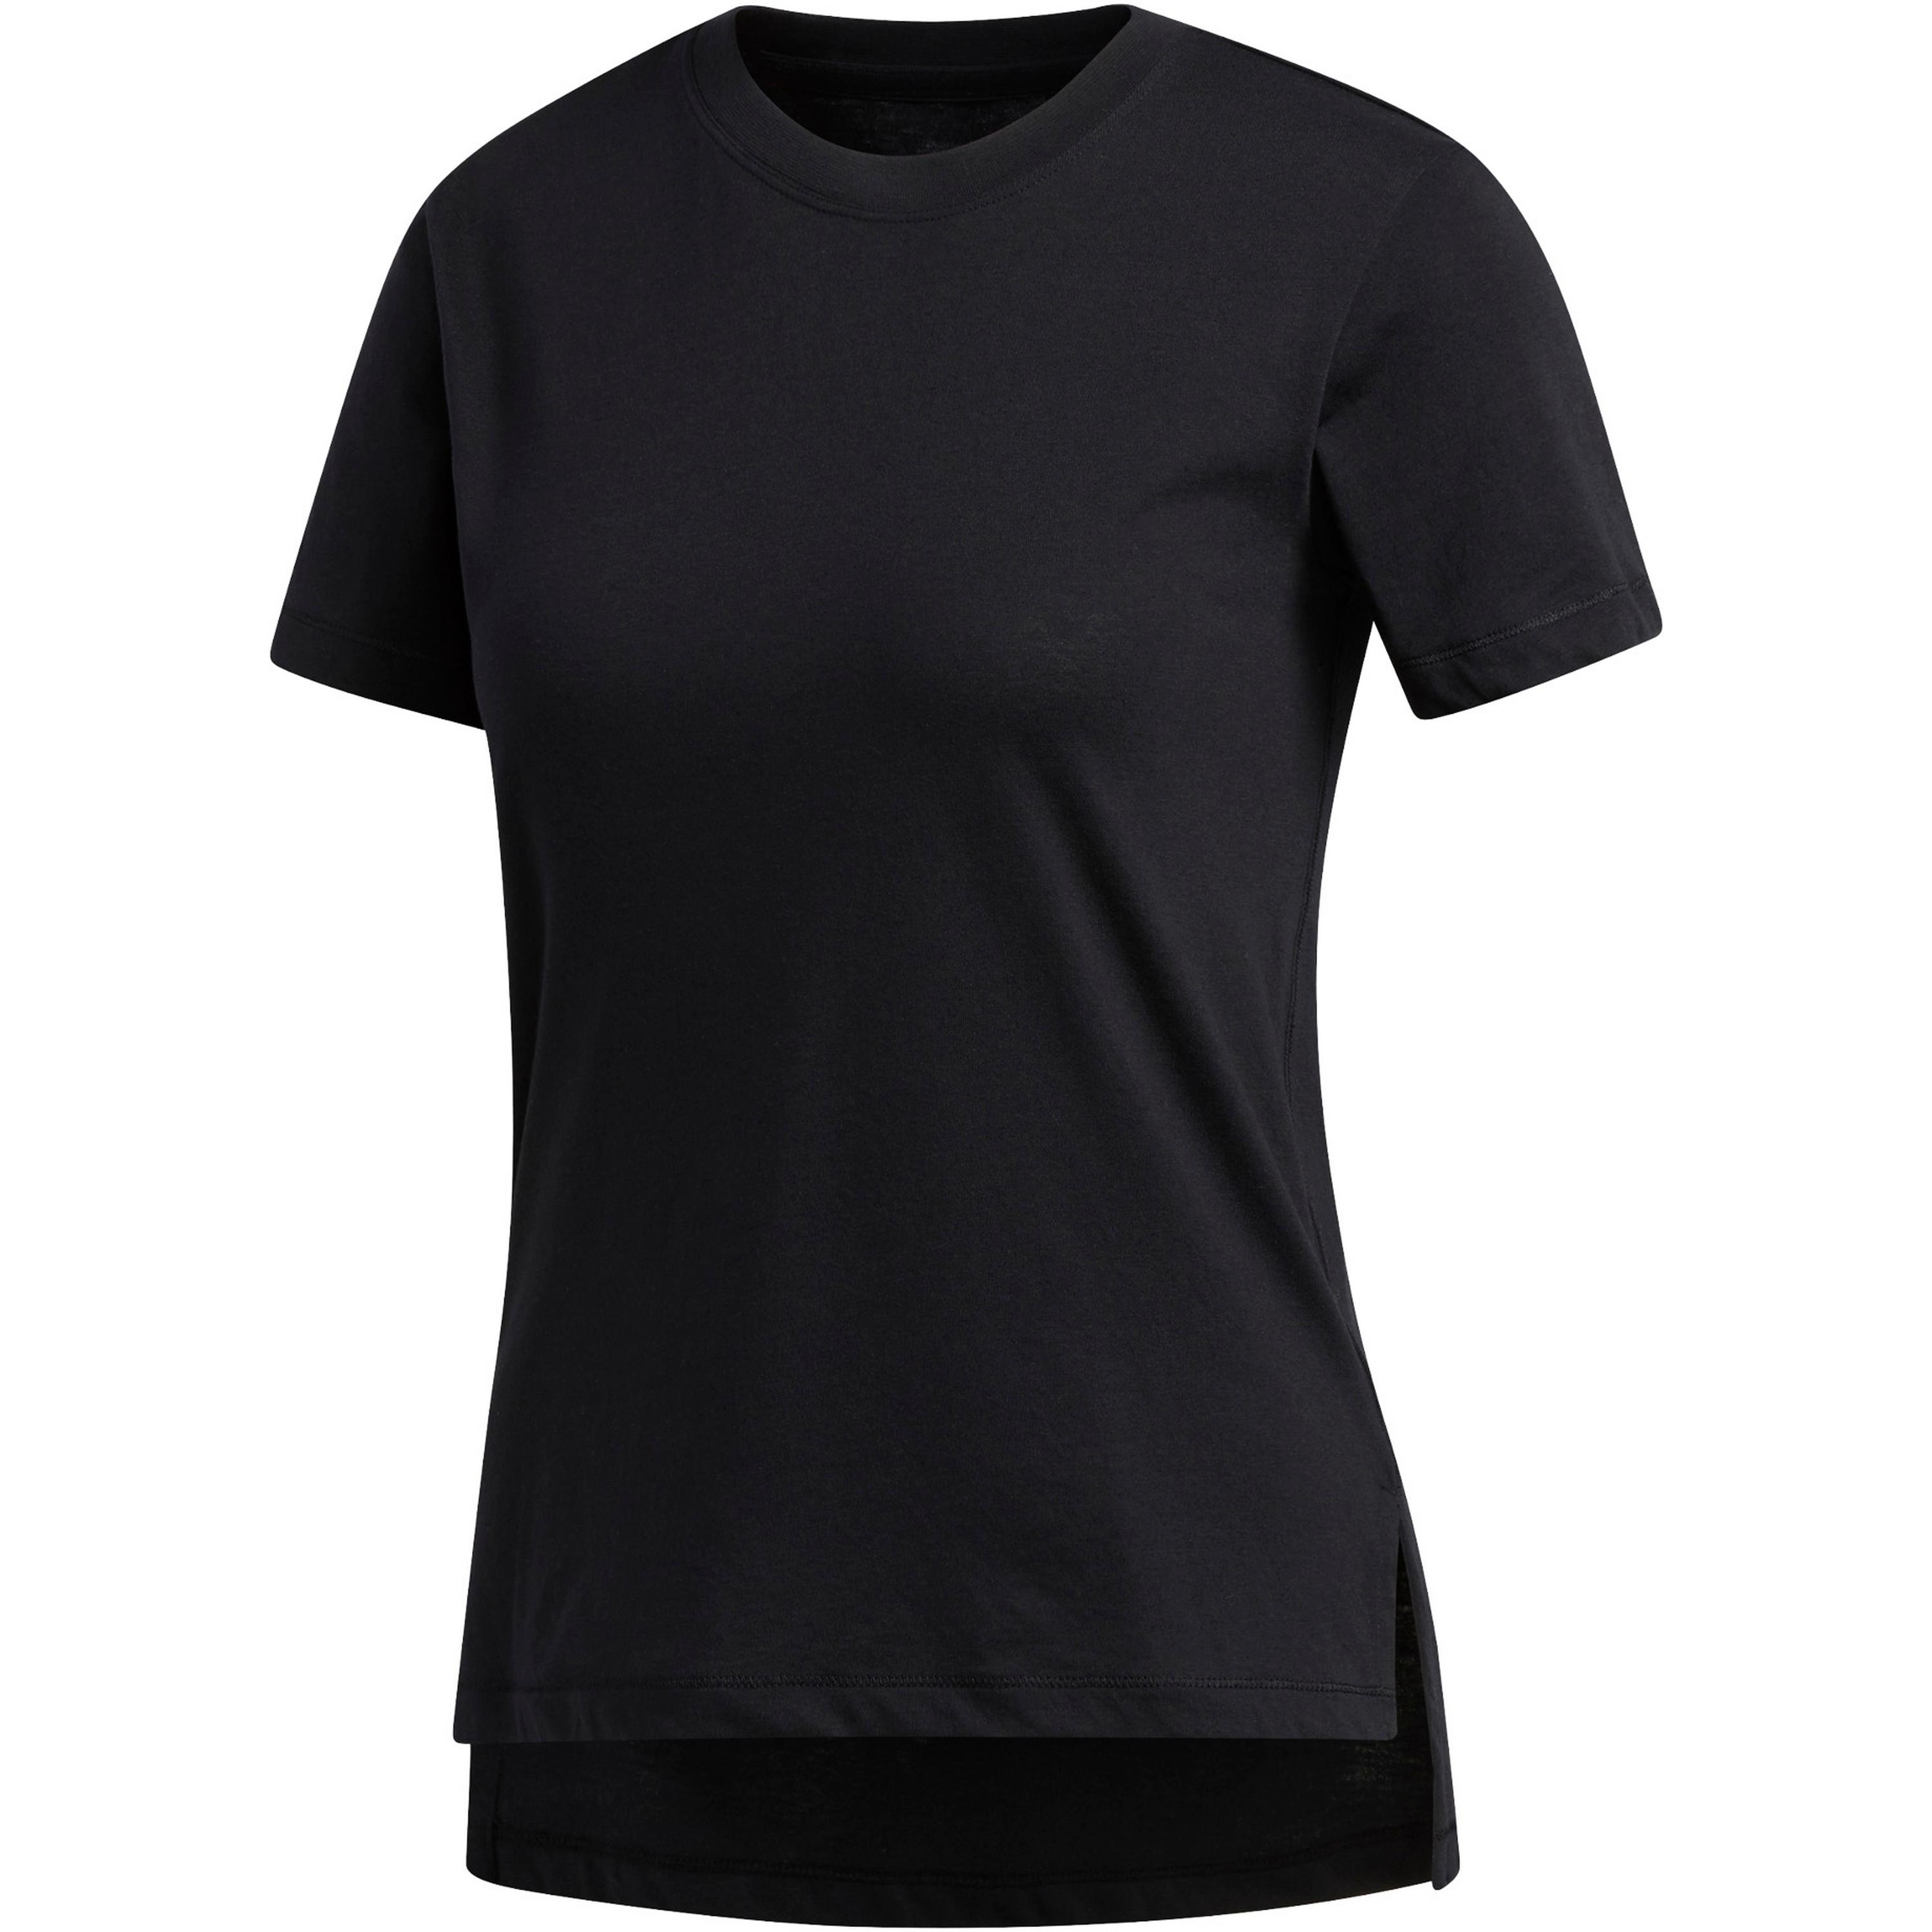 Image of adidas Go-To Funktionsshirt Damen